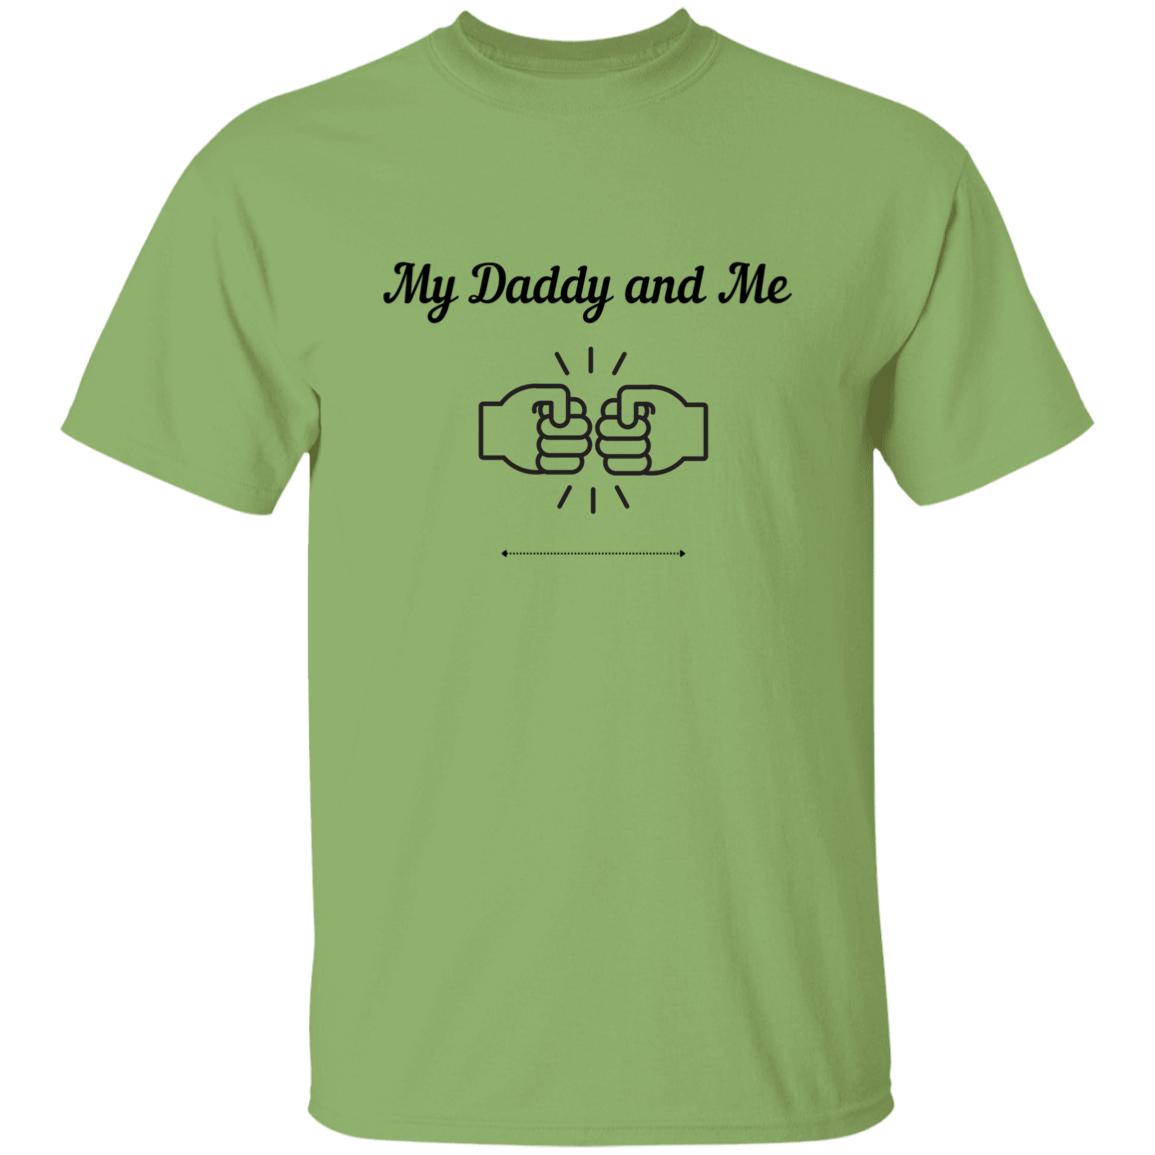 Adult Tee | Father's Day | My Daddy and Me